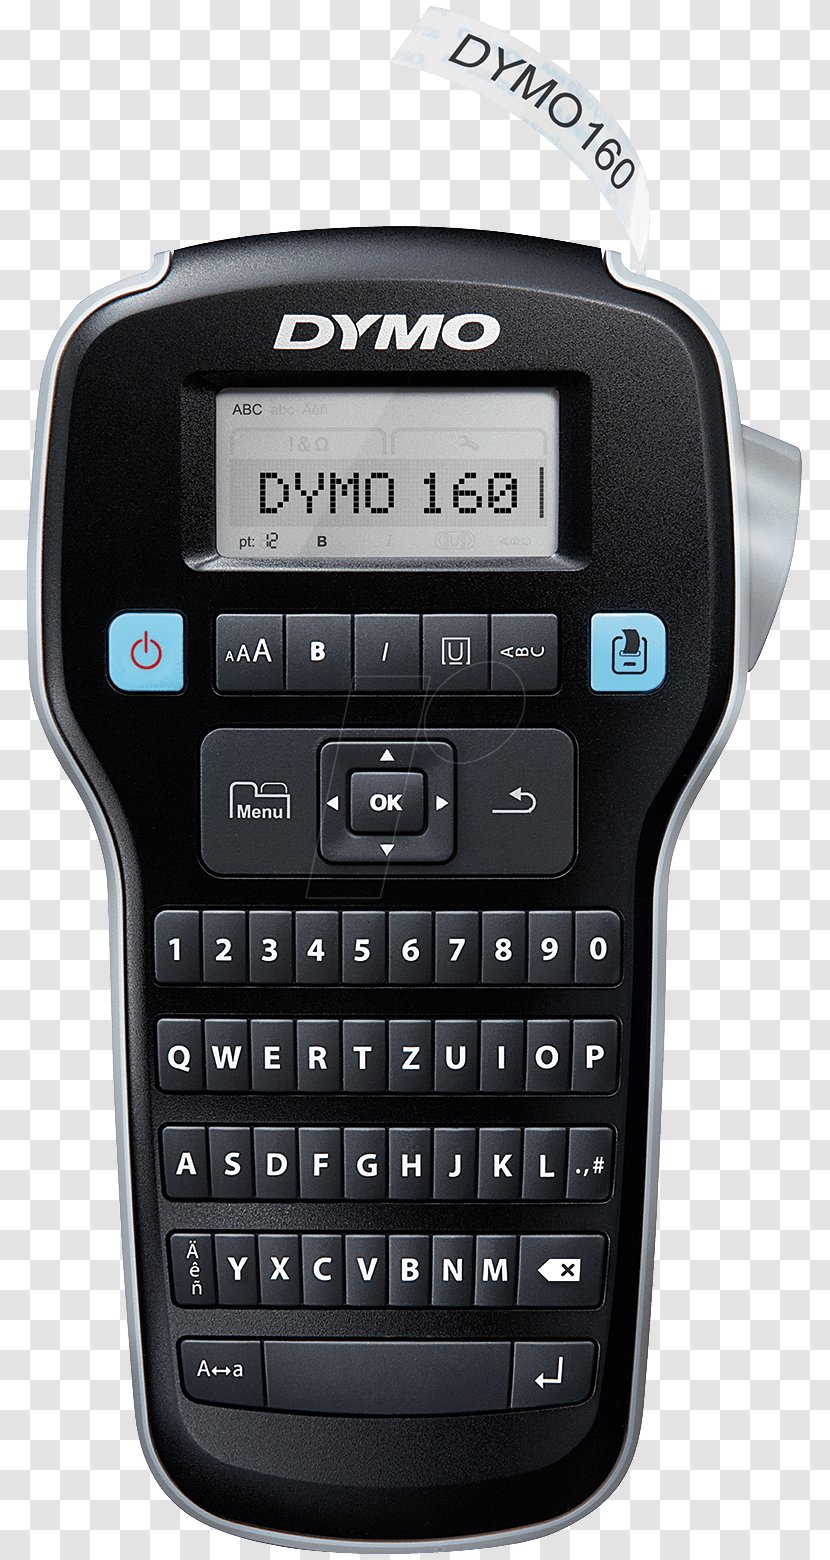 Paper DYMO BVBA Dymo LabelManager 160 Label Printer - Stationery - Lm Transparent PNG